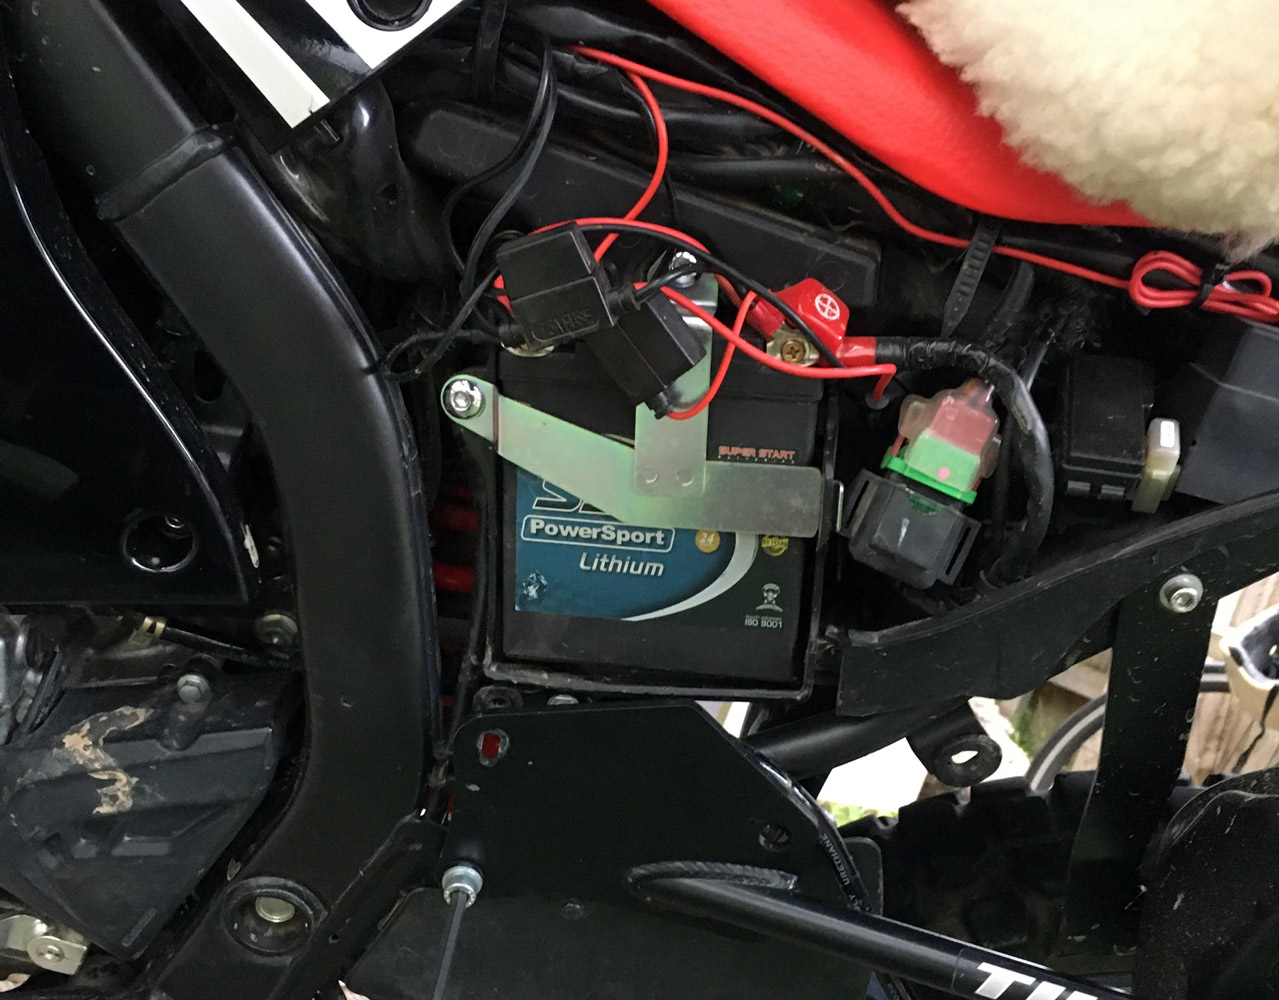 The SSB LH71-BS lithium ion battery installed on the Honda CRF250 Rally